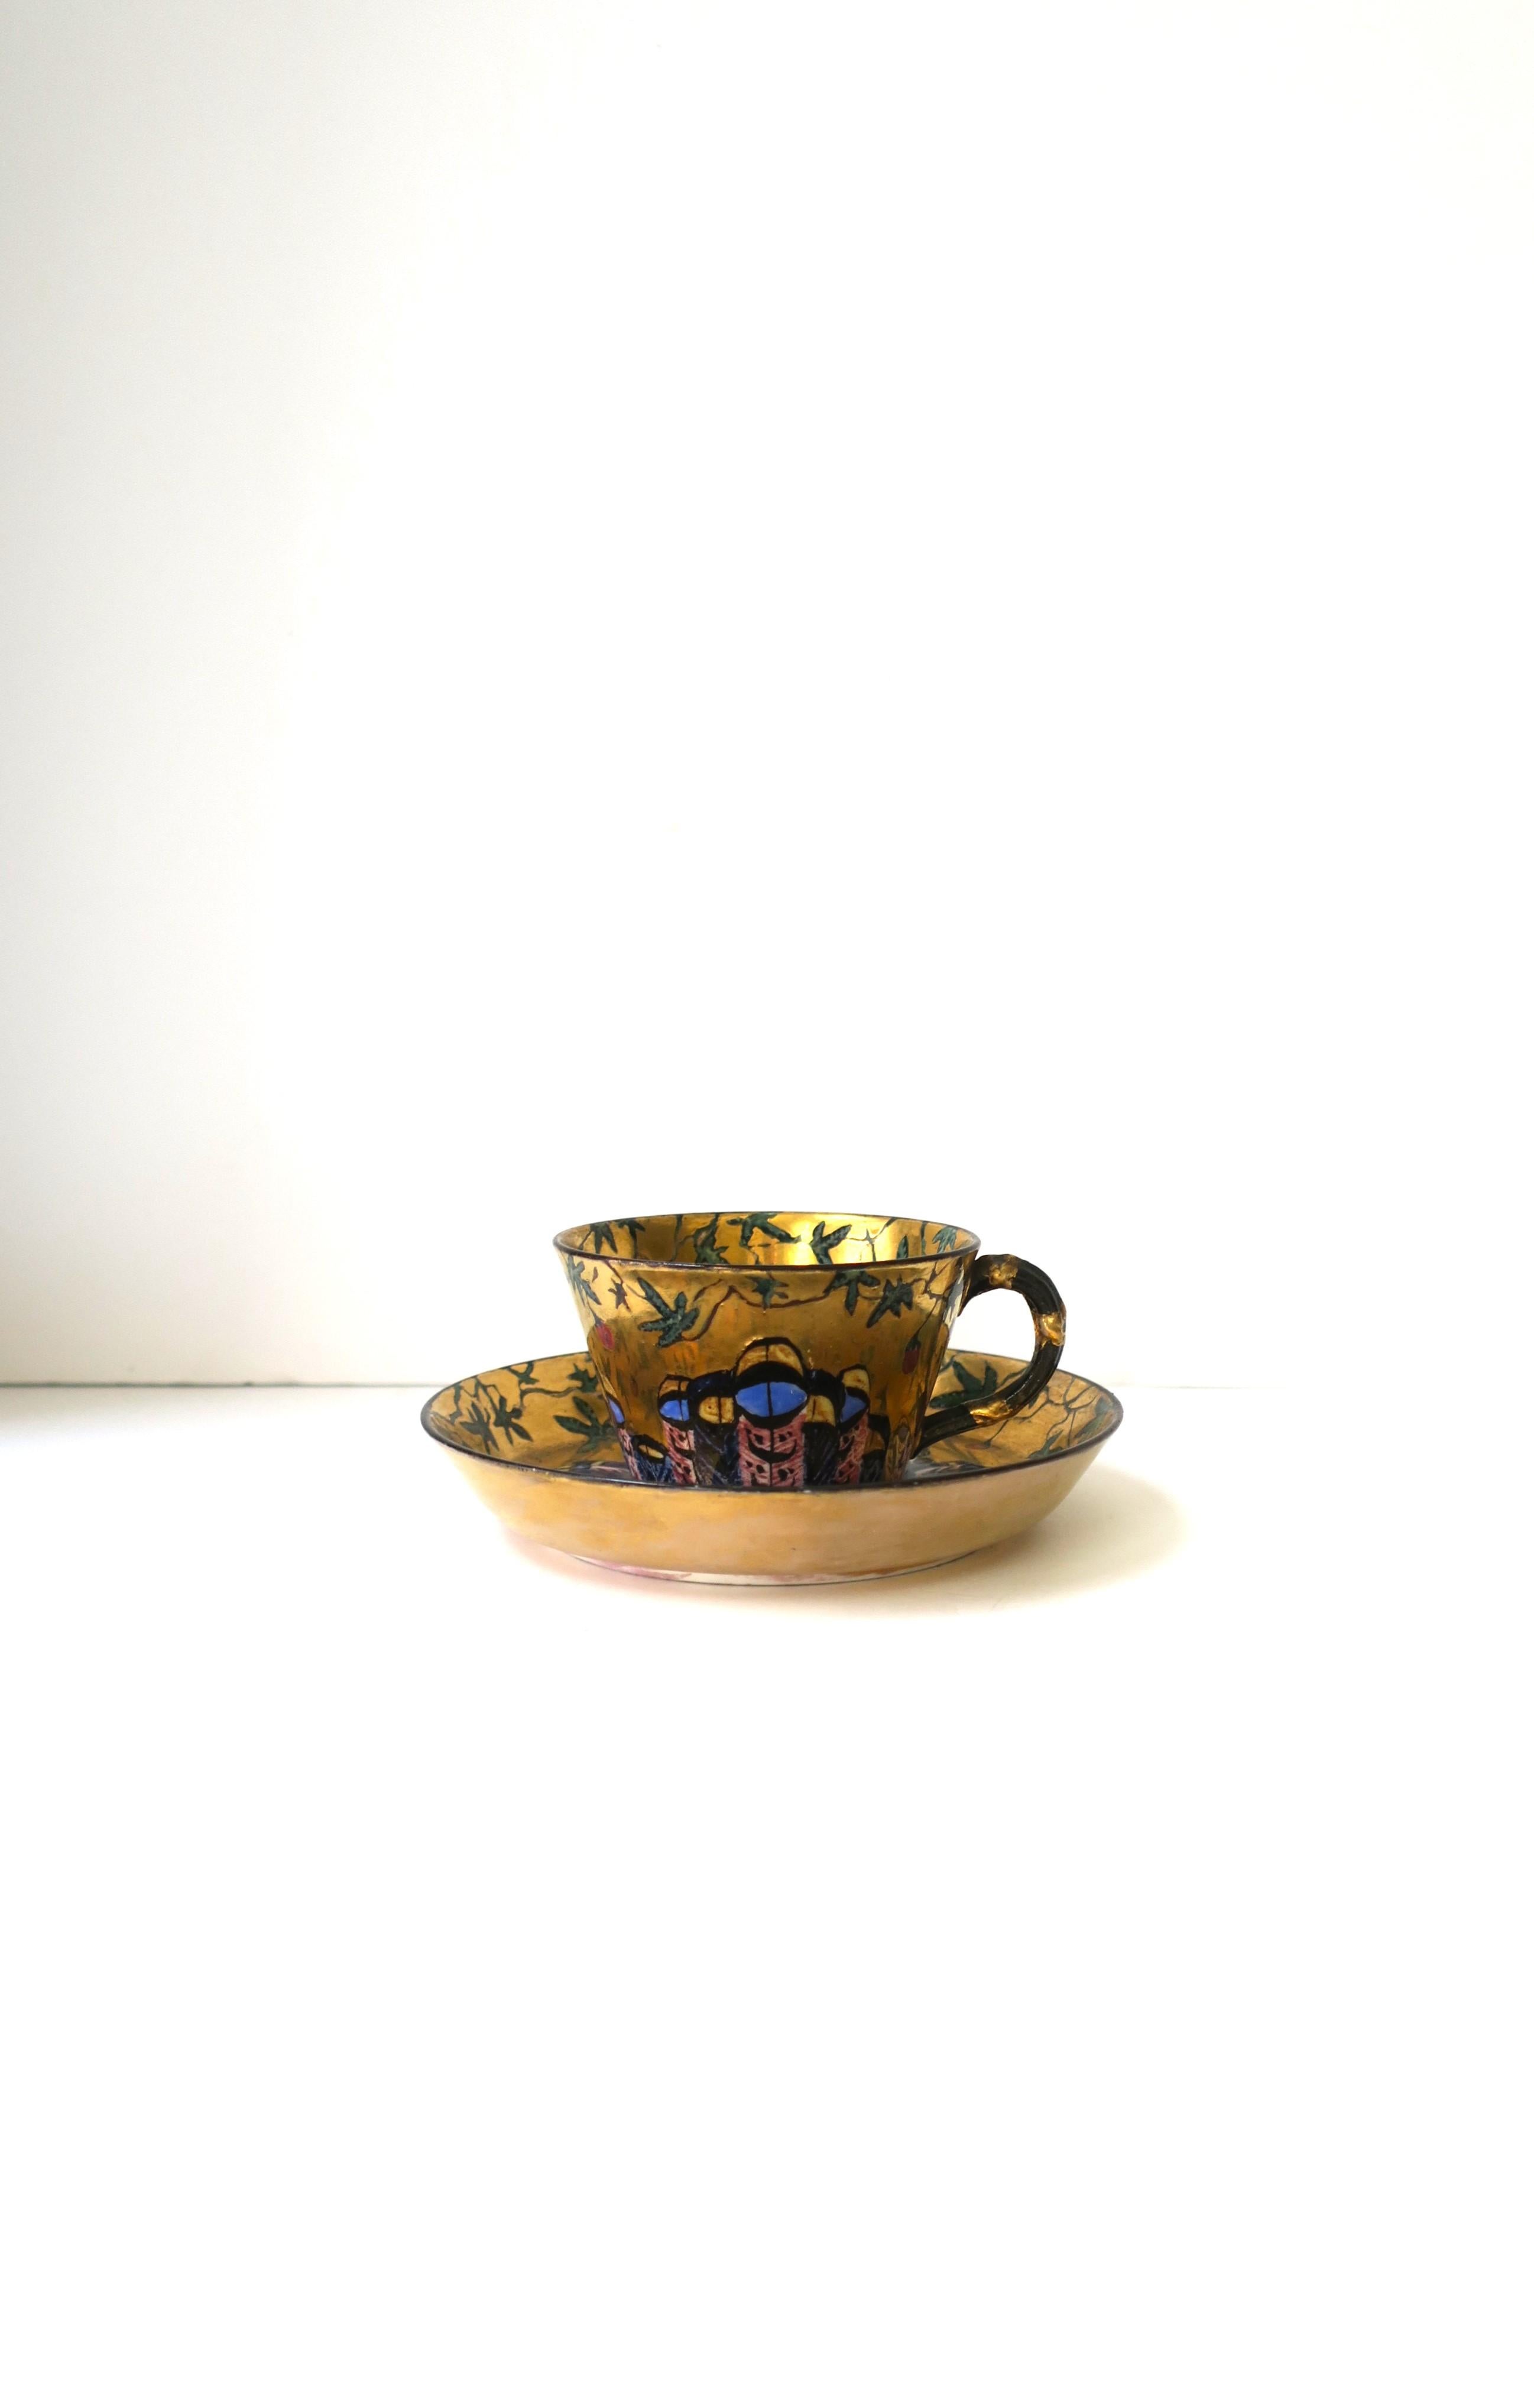 A very beautiful and special porcelain coffee or tea cup and saucer, circa early to mid-20th century. Maybe French or Italian origin. Designer unknow. Both cup and saucer are all-around gold. Saucer has beautiful green leaf and red flower bud design